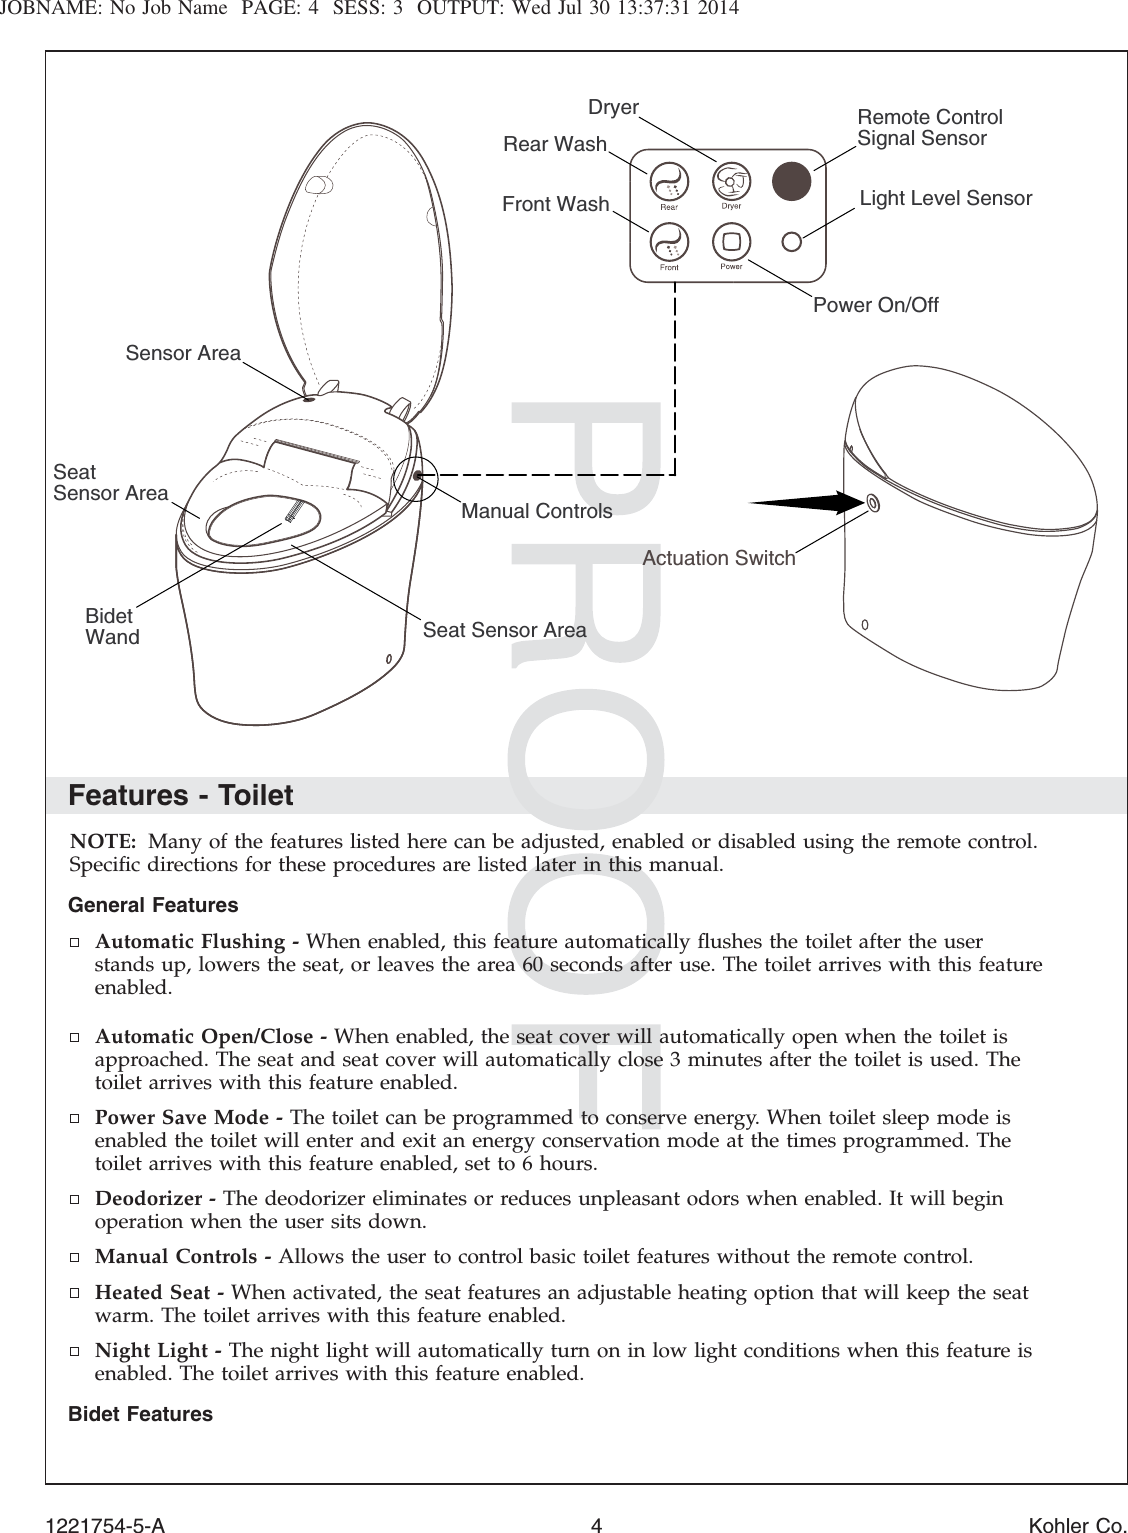 JOBNAME: No Job Name PAGE: 4 SESS: 3 OUTPUT: Wed Jul 30 13:37:31 2014Features - ToiletNOTE: Many of the features listed here can be adjusted, enabled or disabled using the remote control.Speciﬁc directions for these procedures are listed later in this manual.General FeaturesAutomatic Flushing - When enabled, this feature automatically ﬂushes the toilet after the userstands up, lowers the seat, or leaves the area 60 seconds after use. The toilet arrives with this featureenabled.Automatic Open/Close - When enabled, the seat cover will automatically open when the toilet isapproached. The seat and seat cover will automatically close 3 minutes after the toilet is used. Thetoilet arrives with this feature enabled.Power Save Mode - The toilet can be programmed to conserve energy. When toilet sleep mode isenabled the toilet will enter and exit an energy conservation mode at the times programmed. Thetoilet arrives with this feature enabled, set to 6 hours.Deodorizer - The deodorizer eliminates or reduces unpleasant odors when enabled. It will beginoperation when the user sits down.Manual Controls - Allows the user to control basic toilet features without the remote control.Heated Seat - When activated, the seat features an adjustable heating option that will keep the seatwarm. The toilet arrives with this feature enabled.Night Light - The night light will automatically turn on in low light conditions when this feature isenabled. The toilet arrives with this feature enabled.Bidet FeaturesActuation SwitchRemote Control Signal SensorManual ControlsSeat Sensor AreaSensor AreaDryerPower On/OffRear WashLight Level SensorFront Wash Bidet WandSeatSensor Area1221754-5-A 4 Kohler Co.